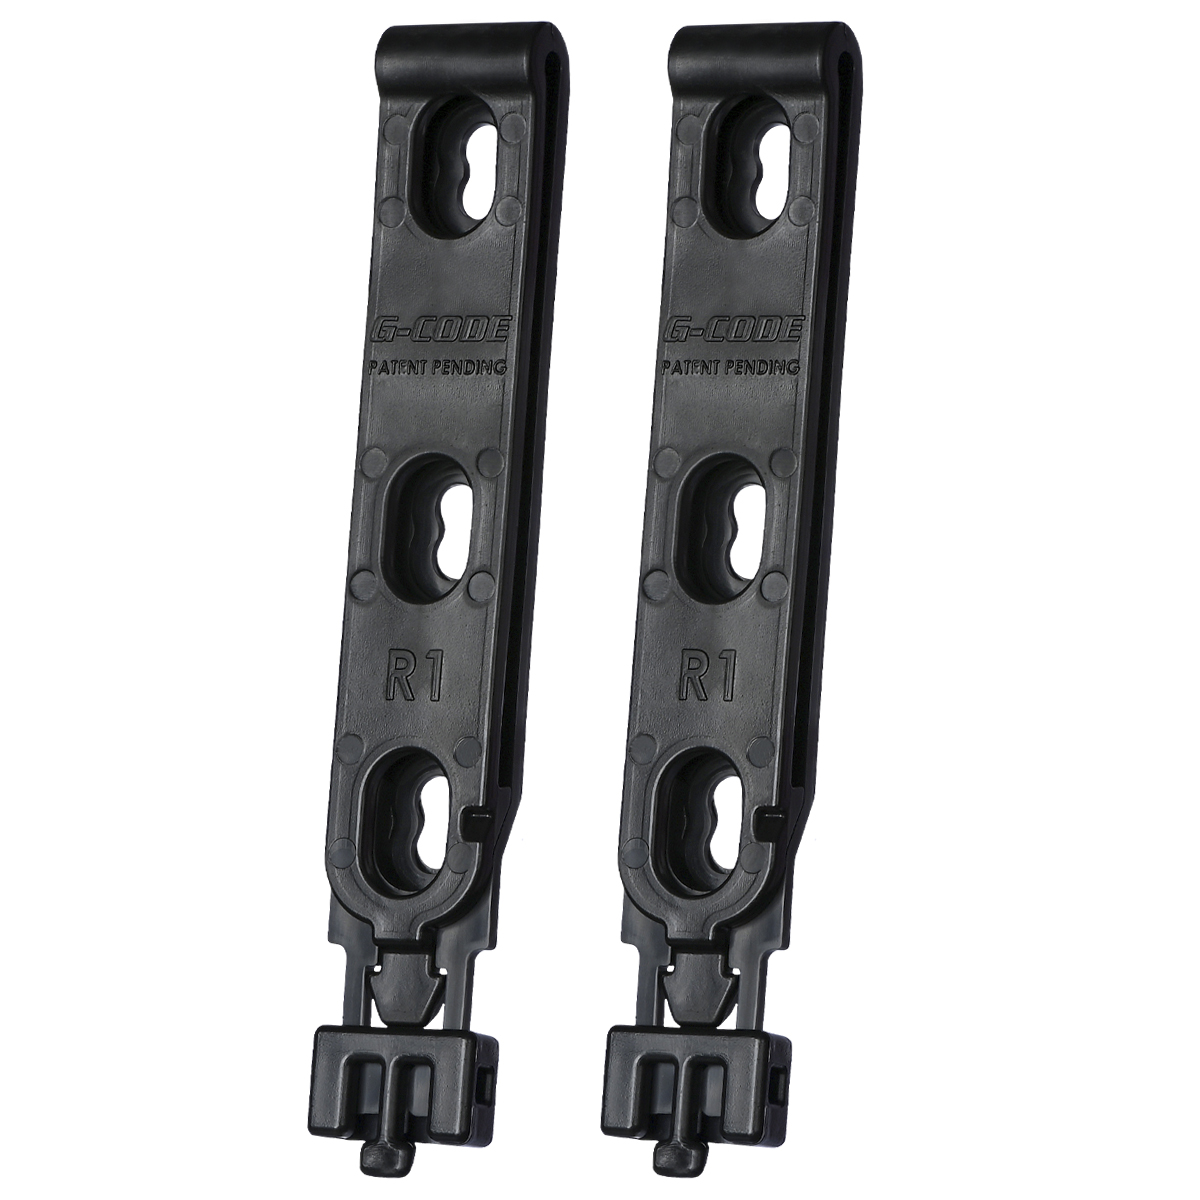 G-CODE Molle Clip for Molle Systems - (GCA43 - R1)